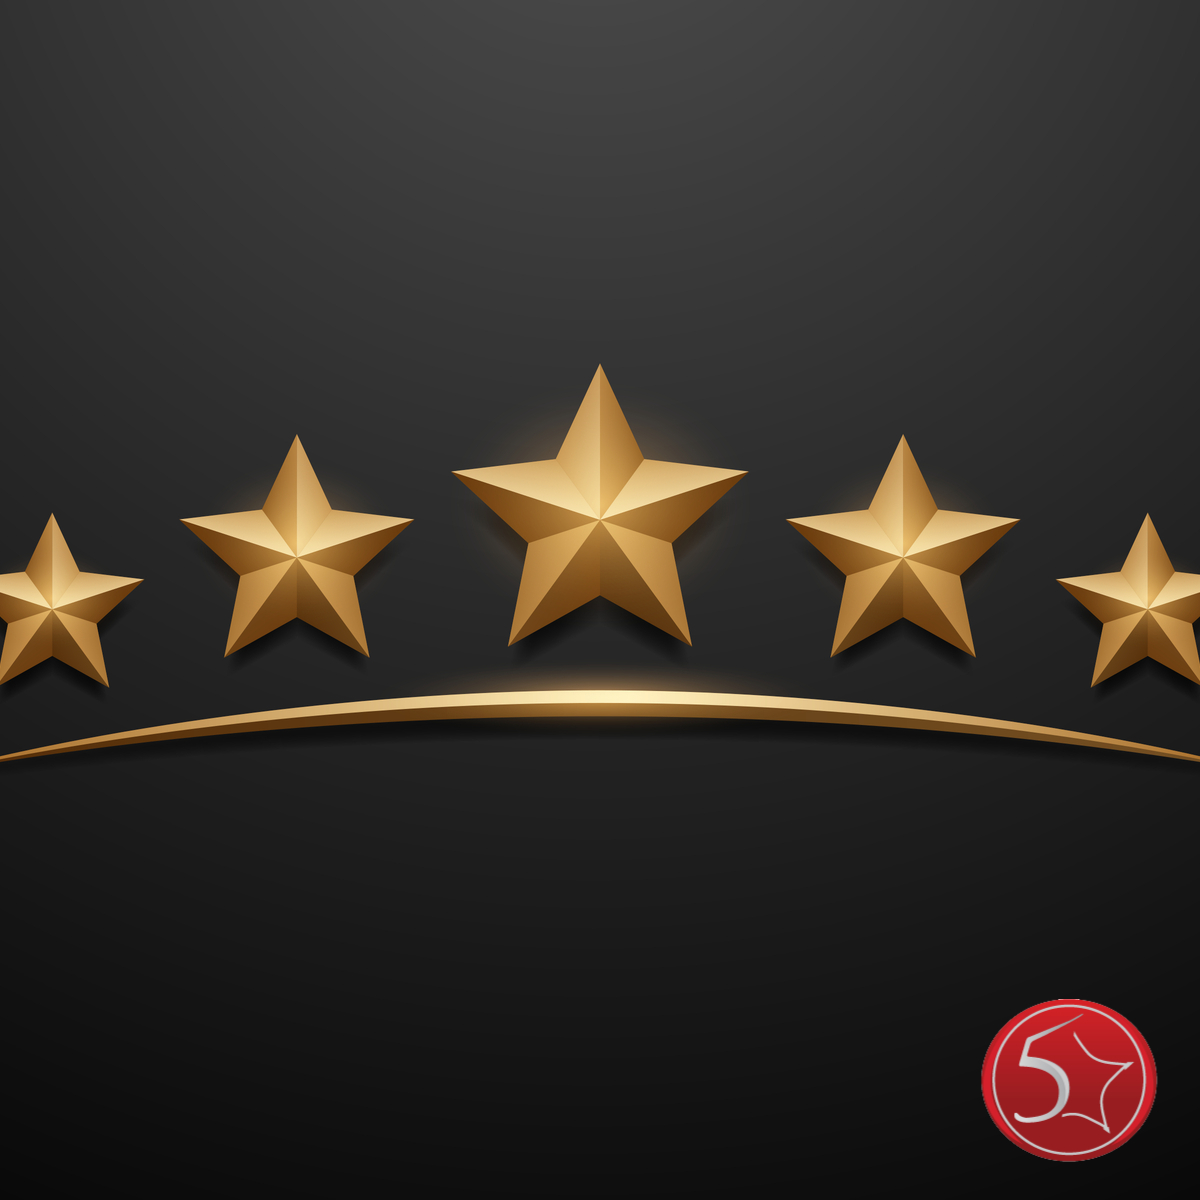 Don’t Forget to Provide Feedback / Reviews for 5 Star Auto Plaza!